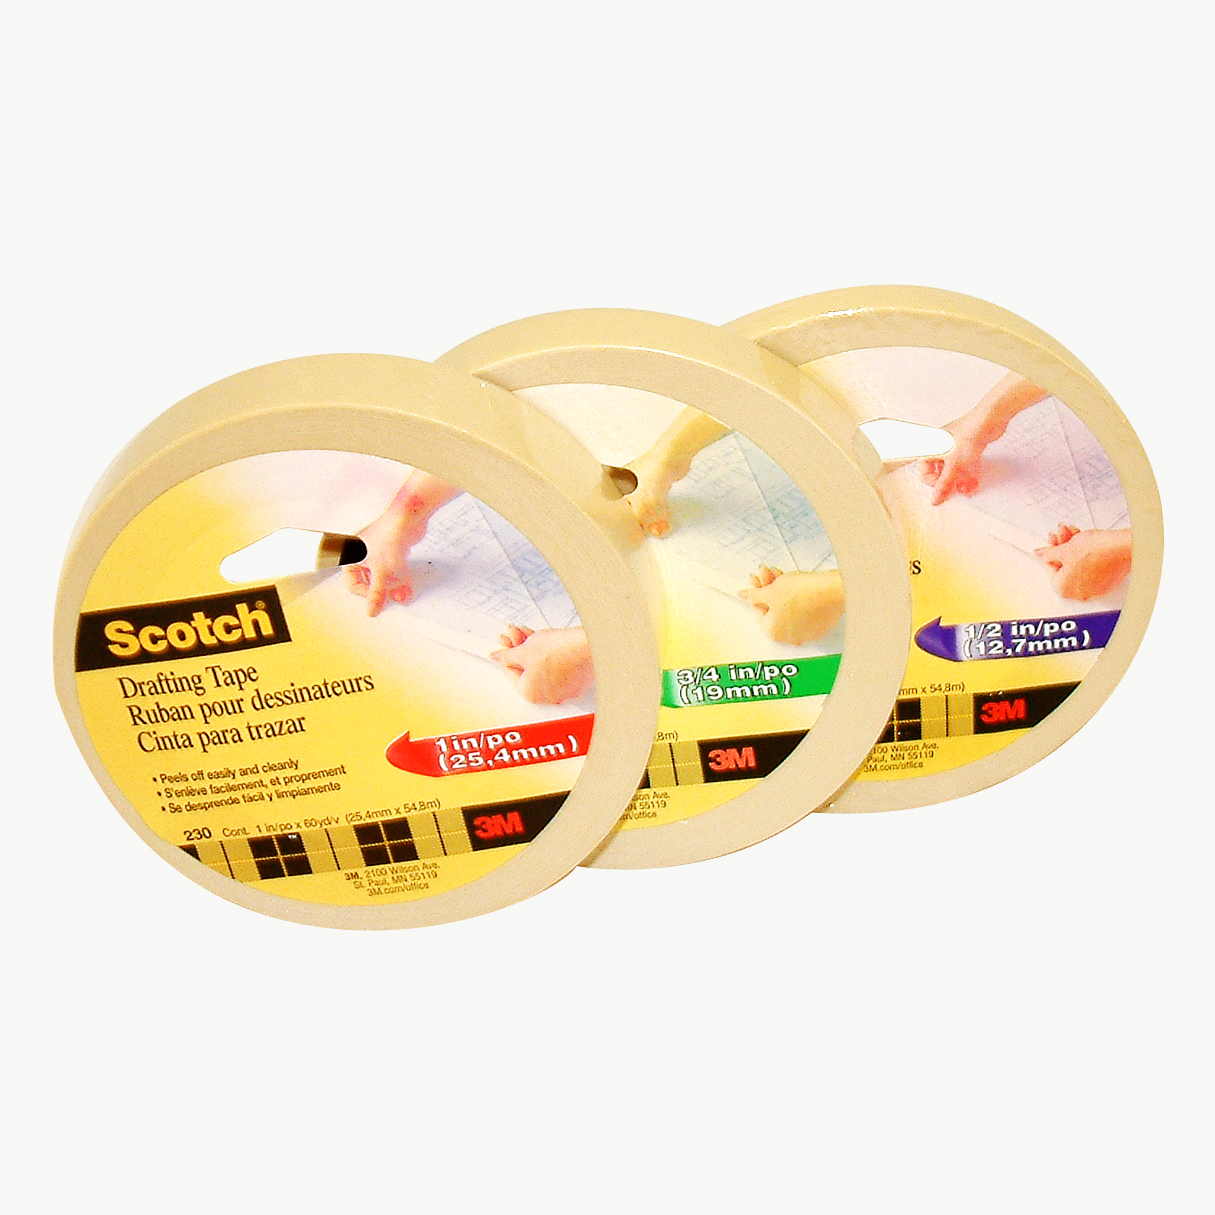 3M 230 Scotch Drafting Tape [Discontinued]